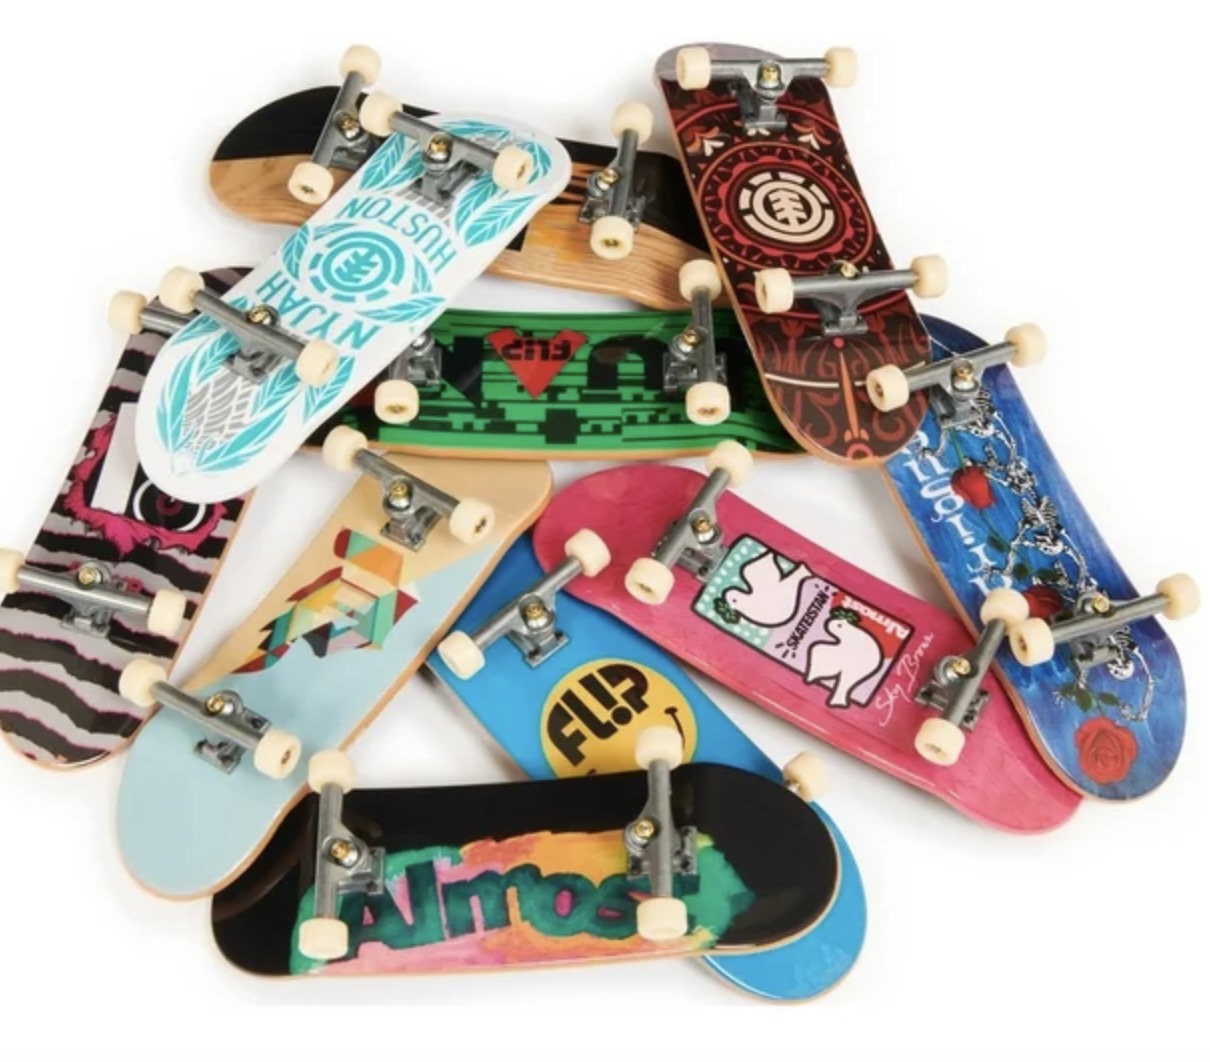 *HOT* Tech Deck 10-Pack of Collectible Fingerboards solely $4.97 {Frugal Stocking Stuffer!}